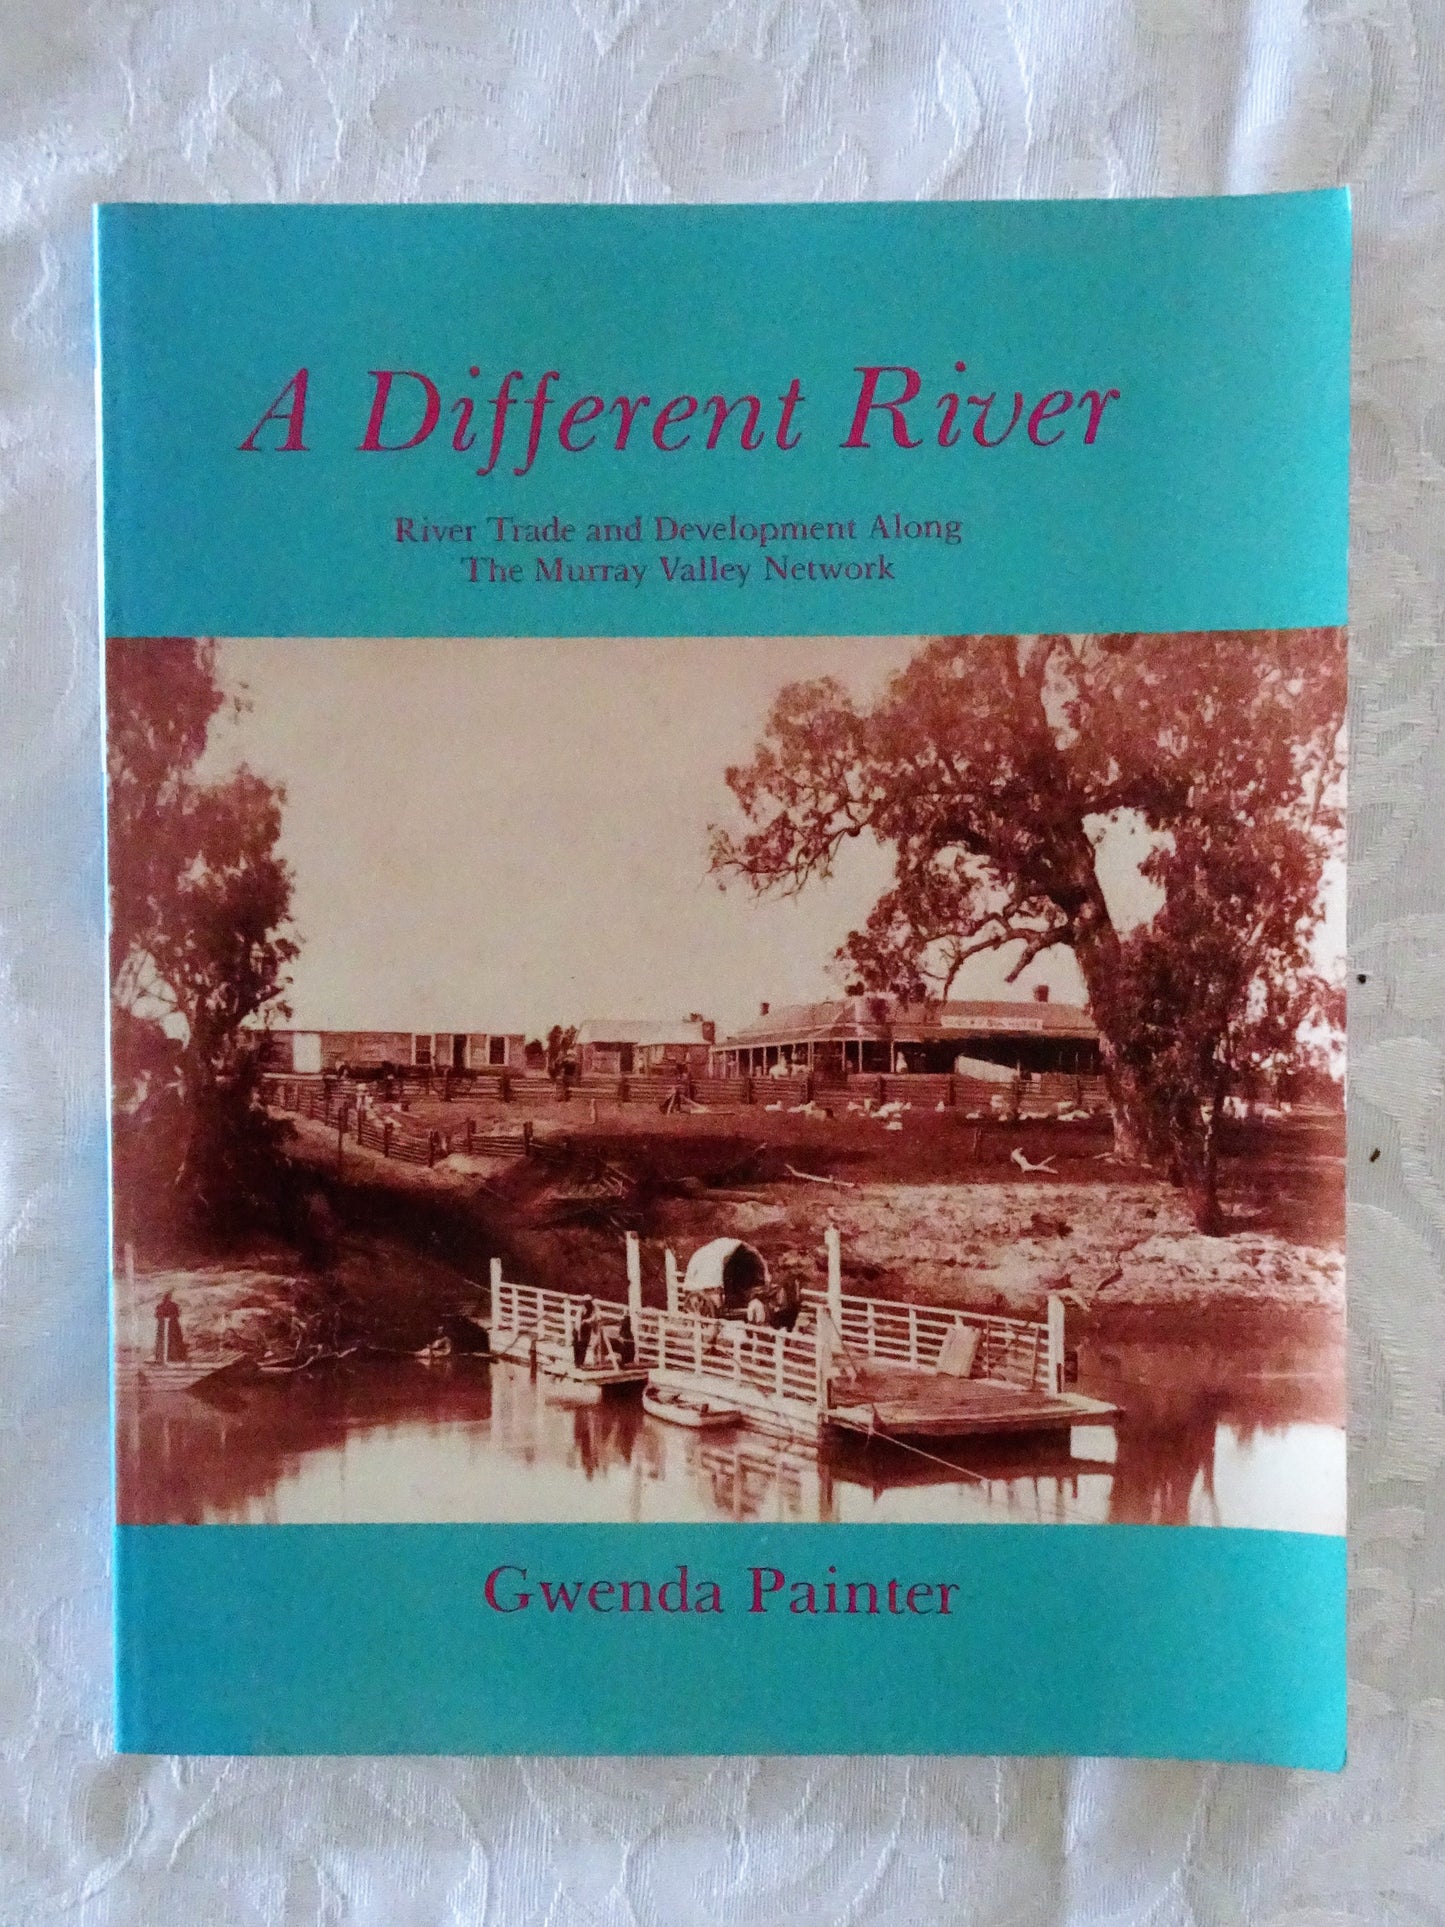 A Different River by Gwenda Painter